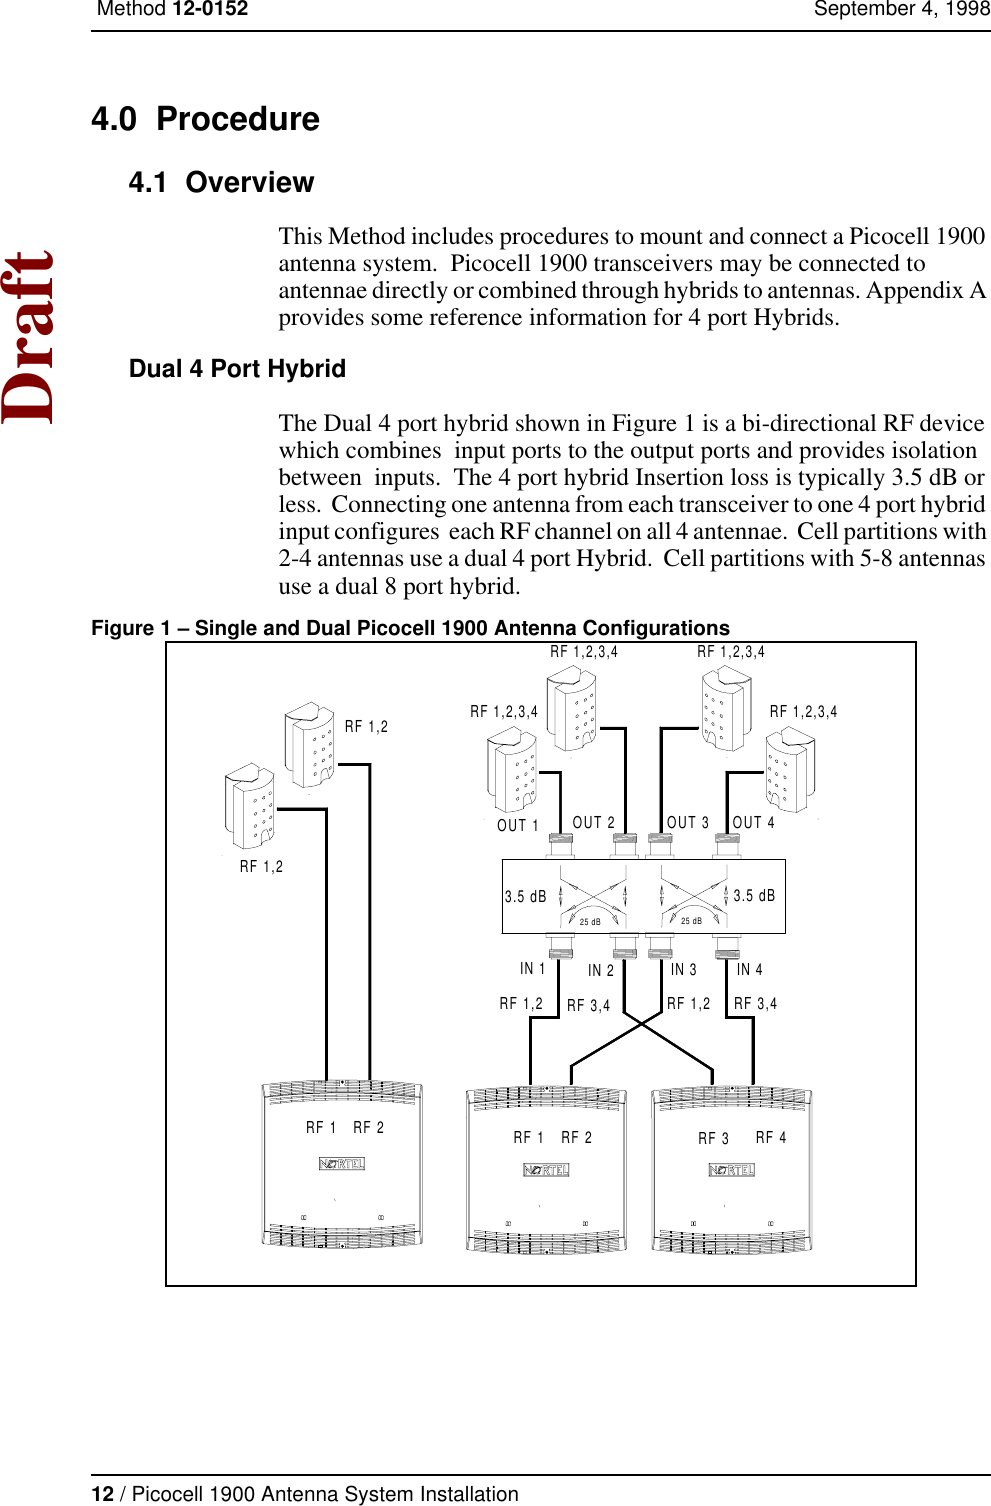 12 / Picocell 1900 Antenna System Installation Method 12-0152 September 4, 1998Draft4.0  Procedure4.1  OverviewThis Method includes procedures to mount and connect a Picocell 1900 antenna system.  Picocell 1900 transceivers may be connected to antennae directly or combined through hybrids to antennas. Appendix A provides some reference information for 4 port Hybrids. Dual 4 Port HybridThe Dual 4 port hybrid shown in Figure 1 is a bi-directional RF device which combines  input ports to the output ports and provides isolation between  inputs.  The 4 port hybrid Insertion loss is typically 3.5 dB or less.  Connecting one antenna from each transceiver to one 4 port hybrid input configures  each RF channel on all 4 antennae.  Cell partitions with 2-4 antennas use a dual 4 port Hybrid.  Cell partitions with 5-8 antennas use a dual 8 port hybrid.Figure 1 – Single and Dual Picocell 1900 Antenna ConfigurationsIN 2RF 3,4OUT 2RF 2RF 1 RF 1 RF 2RF 1,2IN 1RF 1,225 dB3.5 dBOUT 1RF 3 RF 4IN 3 IN 4RF 3,4RF 1,225 dBOUT 4OUT 33.5 dBRF 1,2,3,4RF 1,2 RF 1,2,3,4 RF 1,2,3,4RF 1,2,3,4